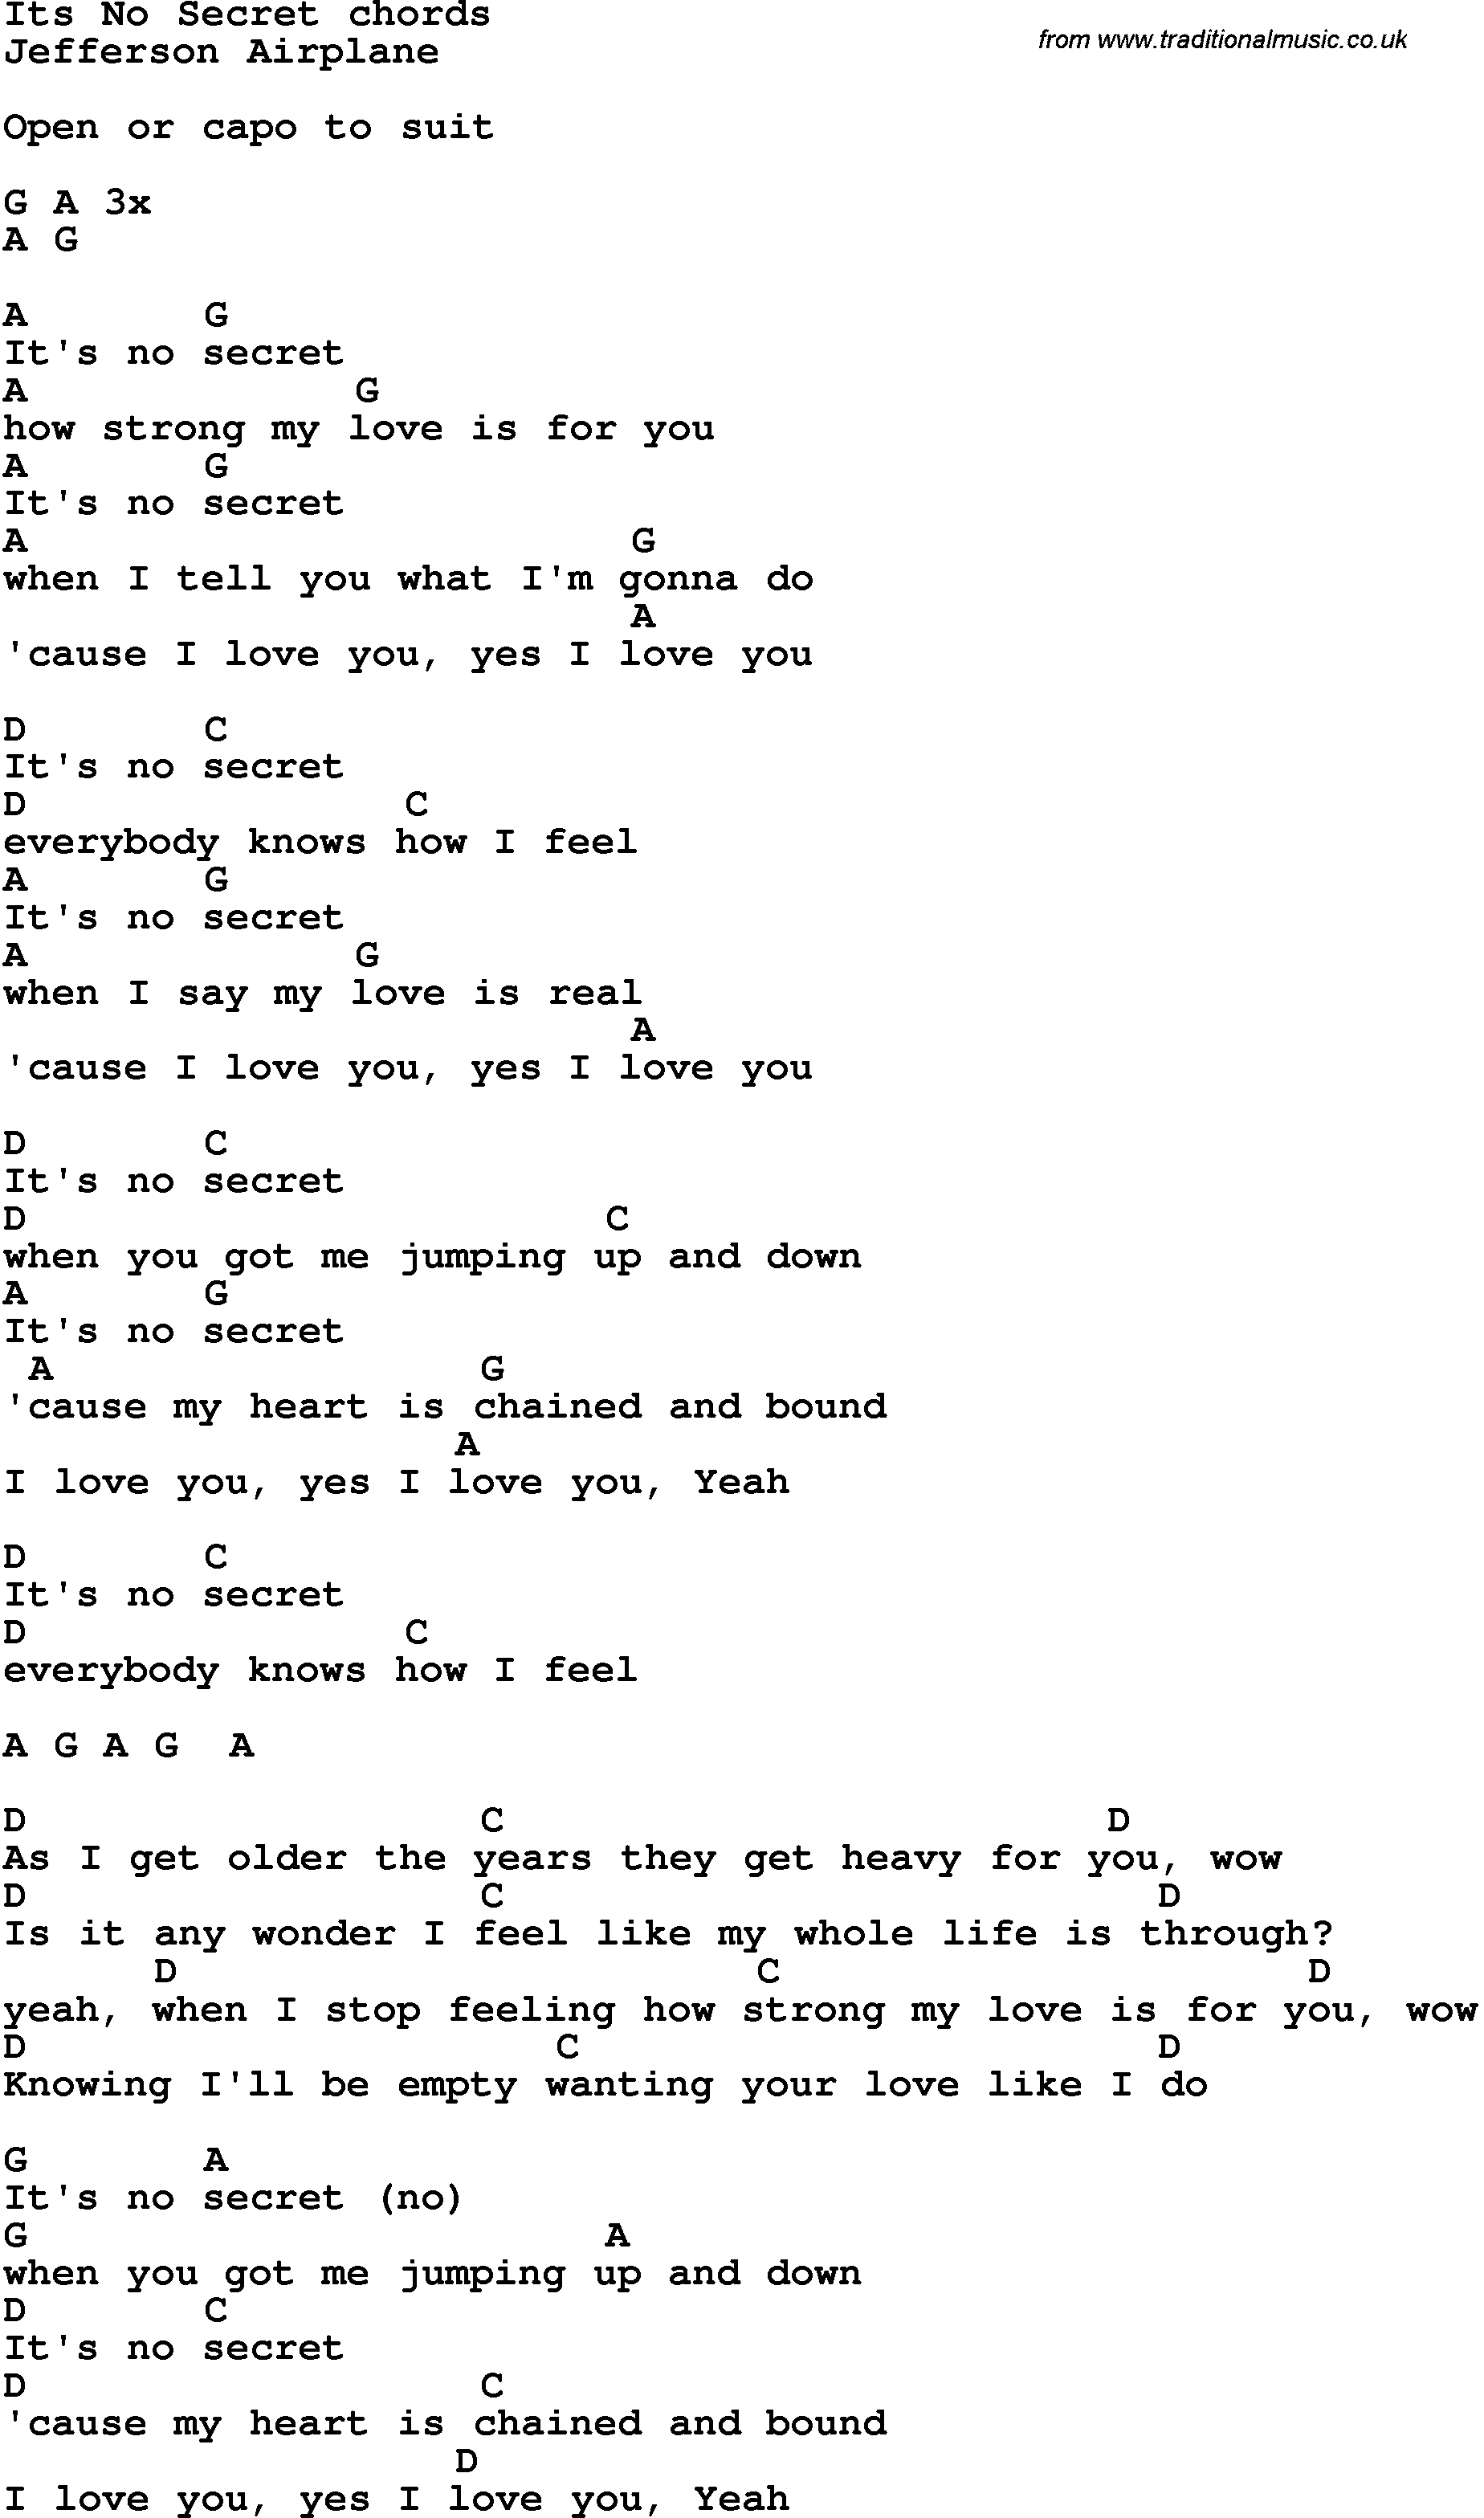 Song Lyrics with guitar chords for It's No Secre